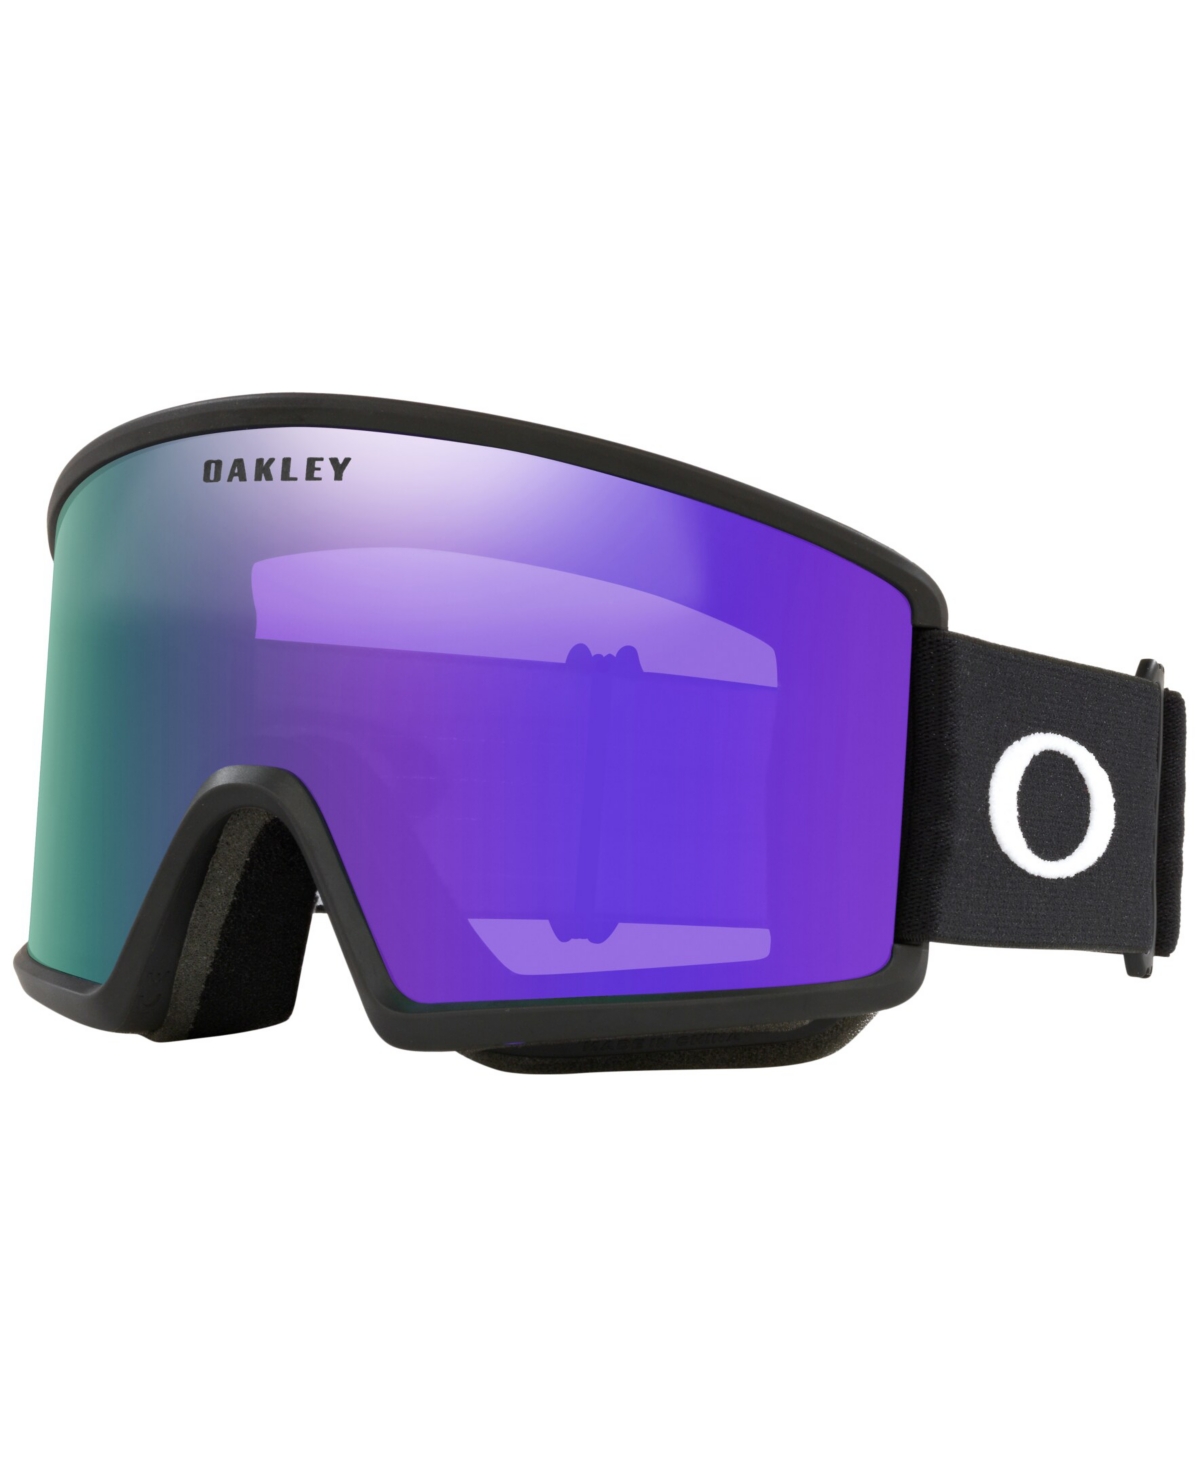 OAKLEY UNISEX TARGET LINE L SNOW GOGGLES, OO7120-14